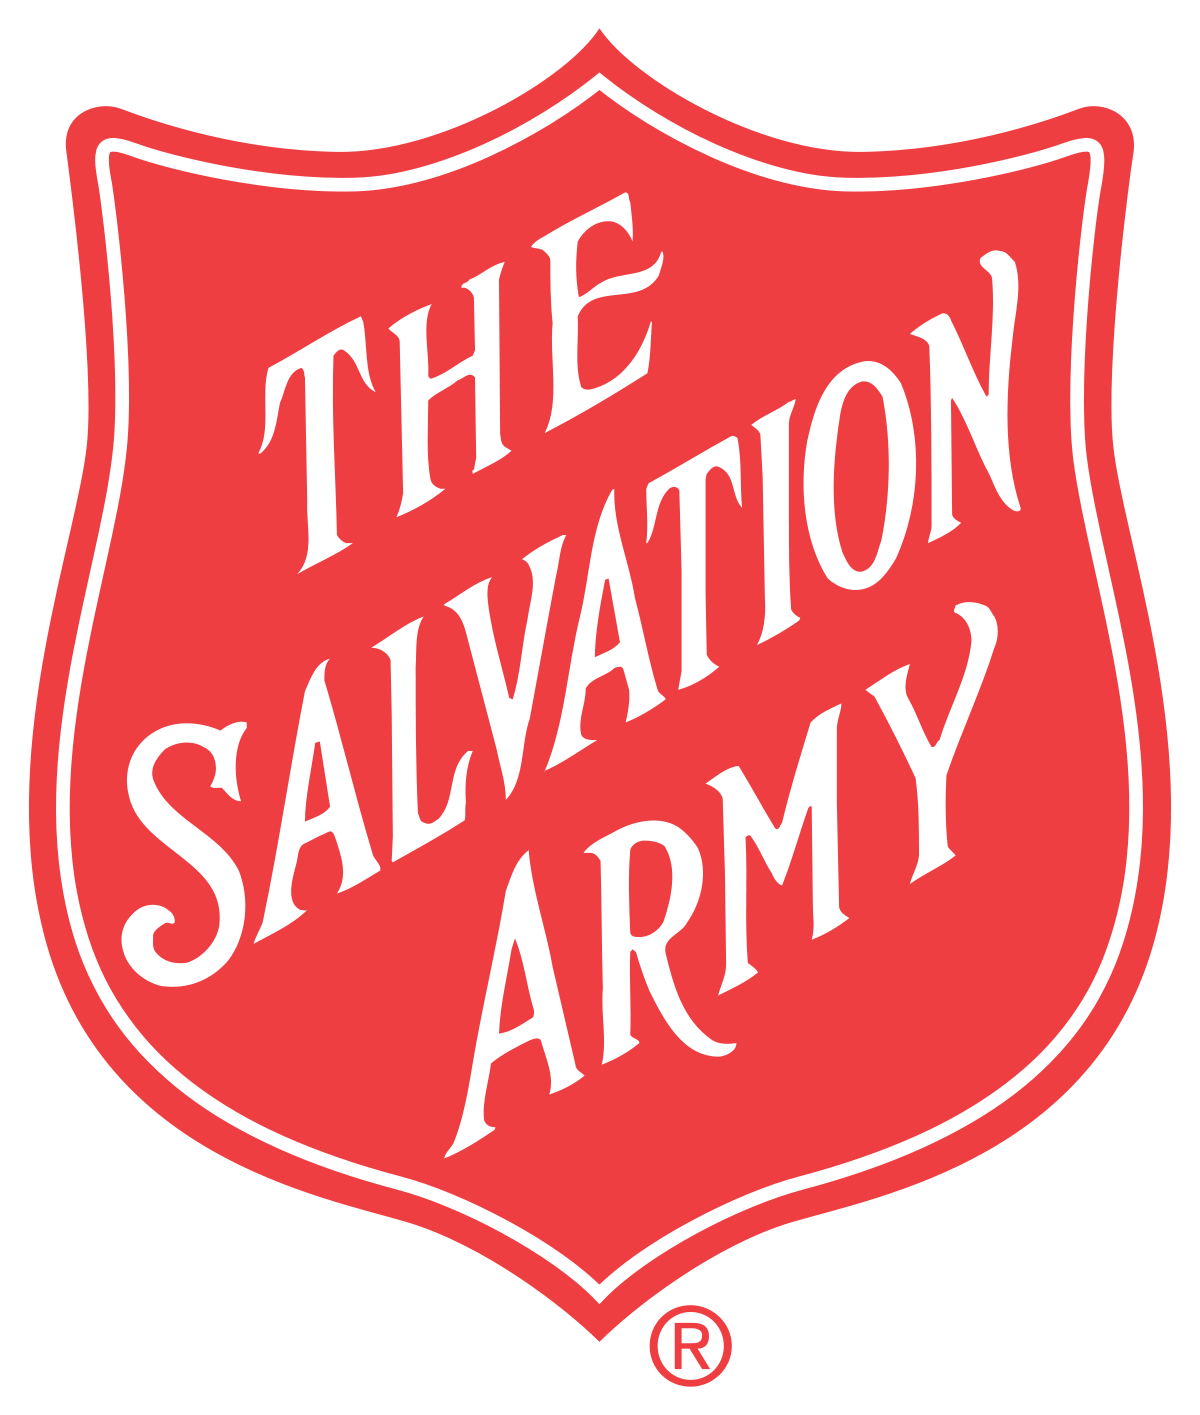 Drinks with Red Shield Logo - The Salvation Army